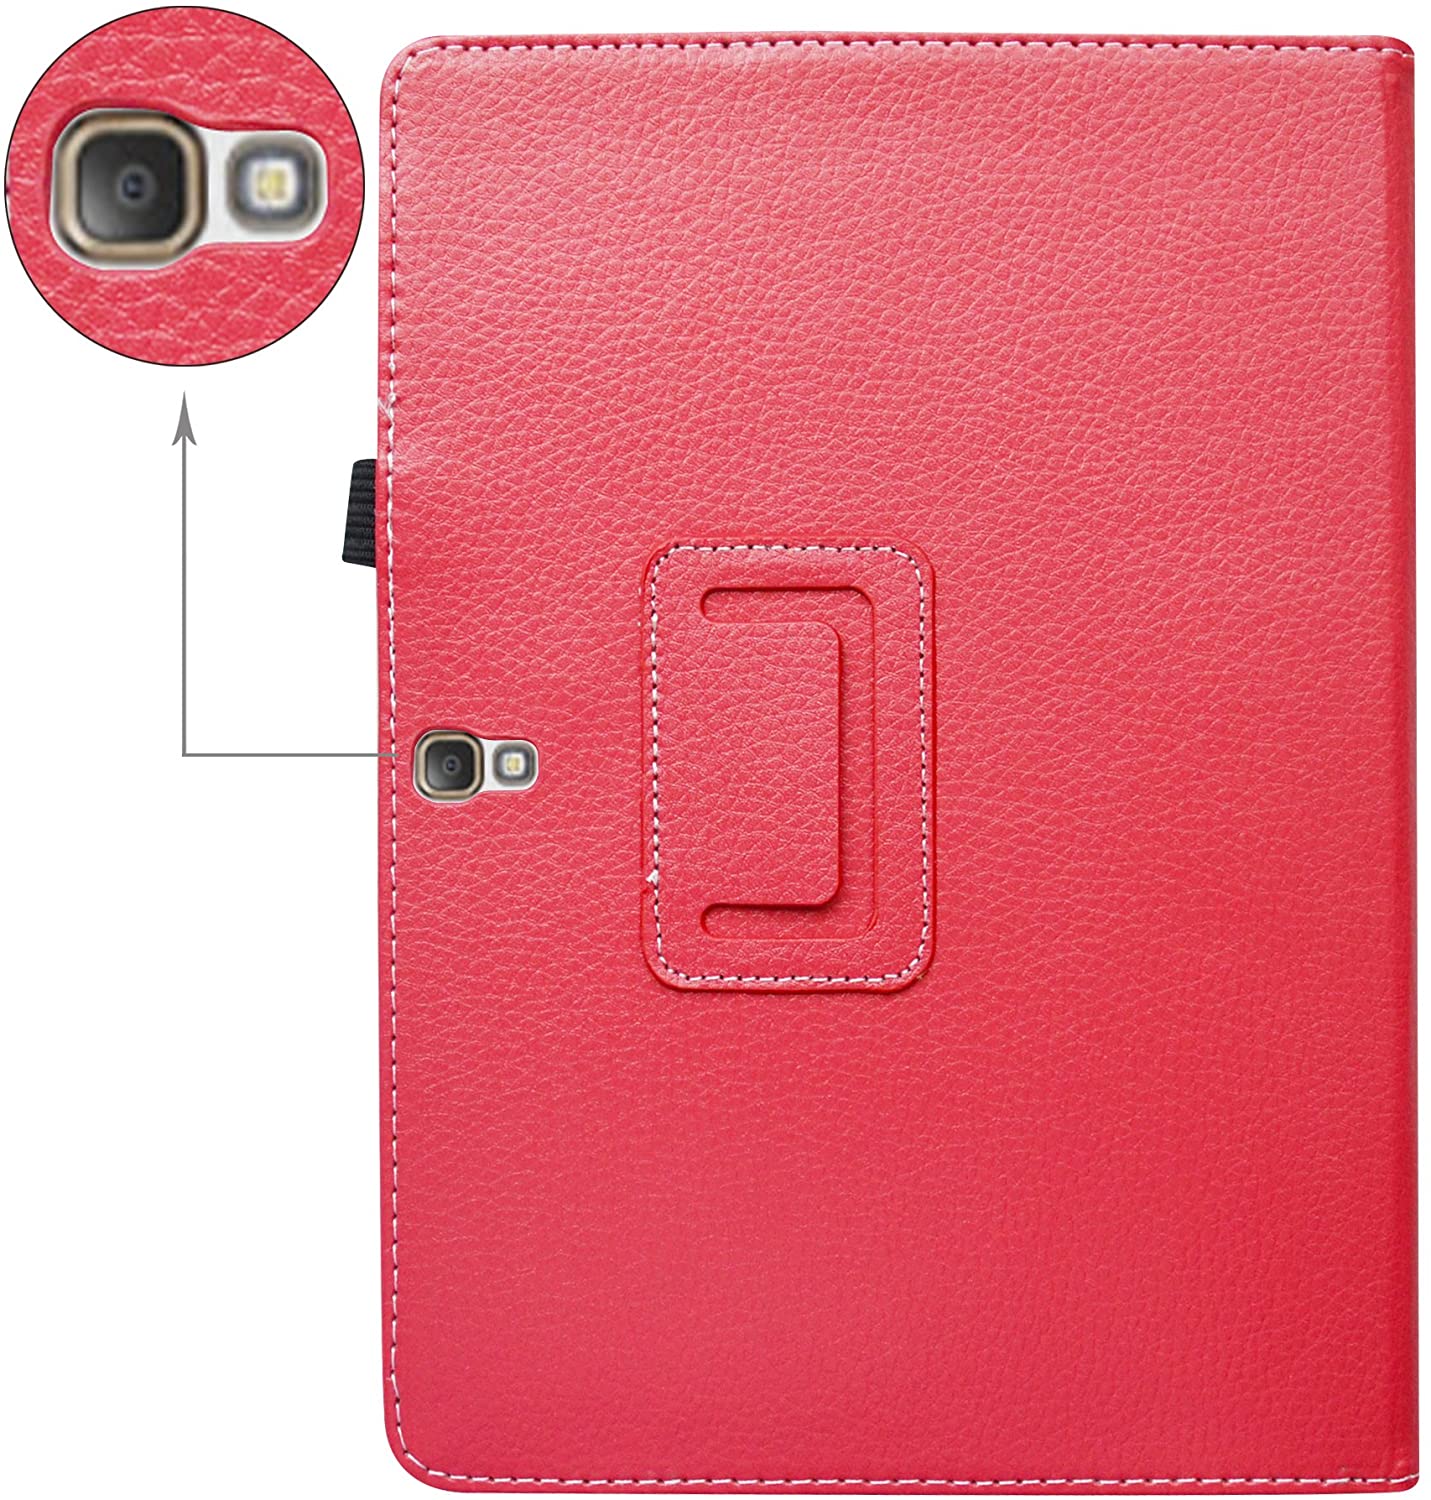 Samsung Tab S 10.5 T800 Case,Mama Mouth PU Leather Folio 2-Folding Stand Cover for 10.5" - RED - e4cents